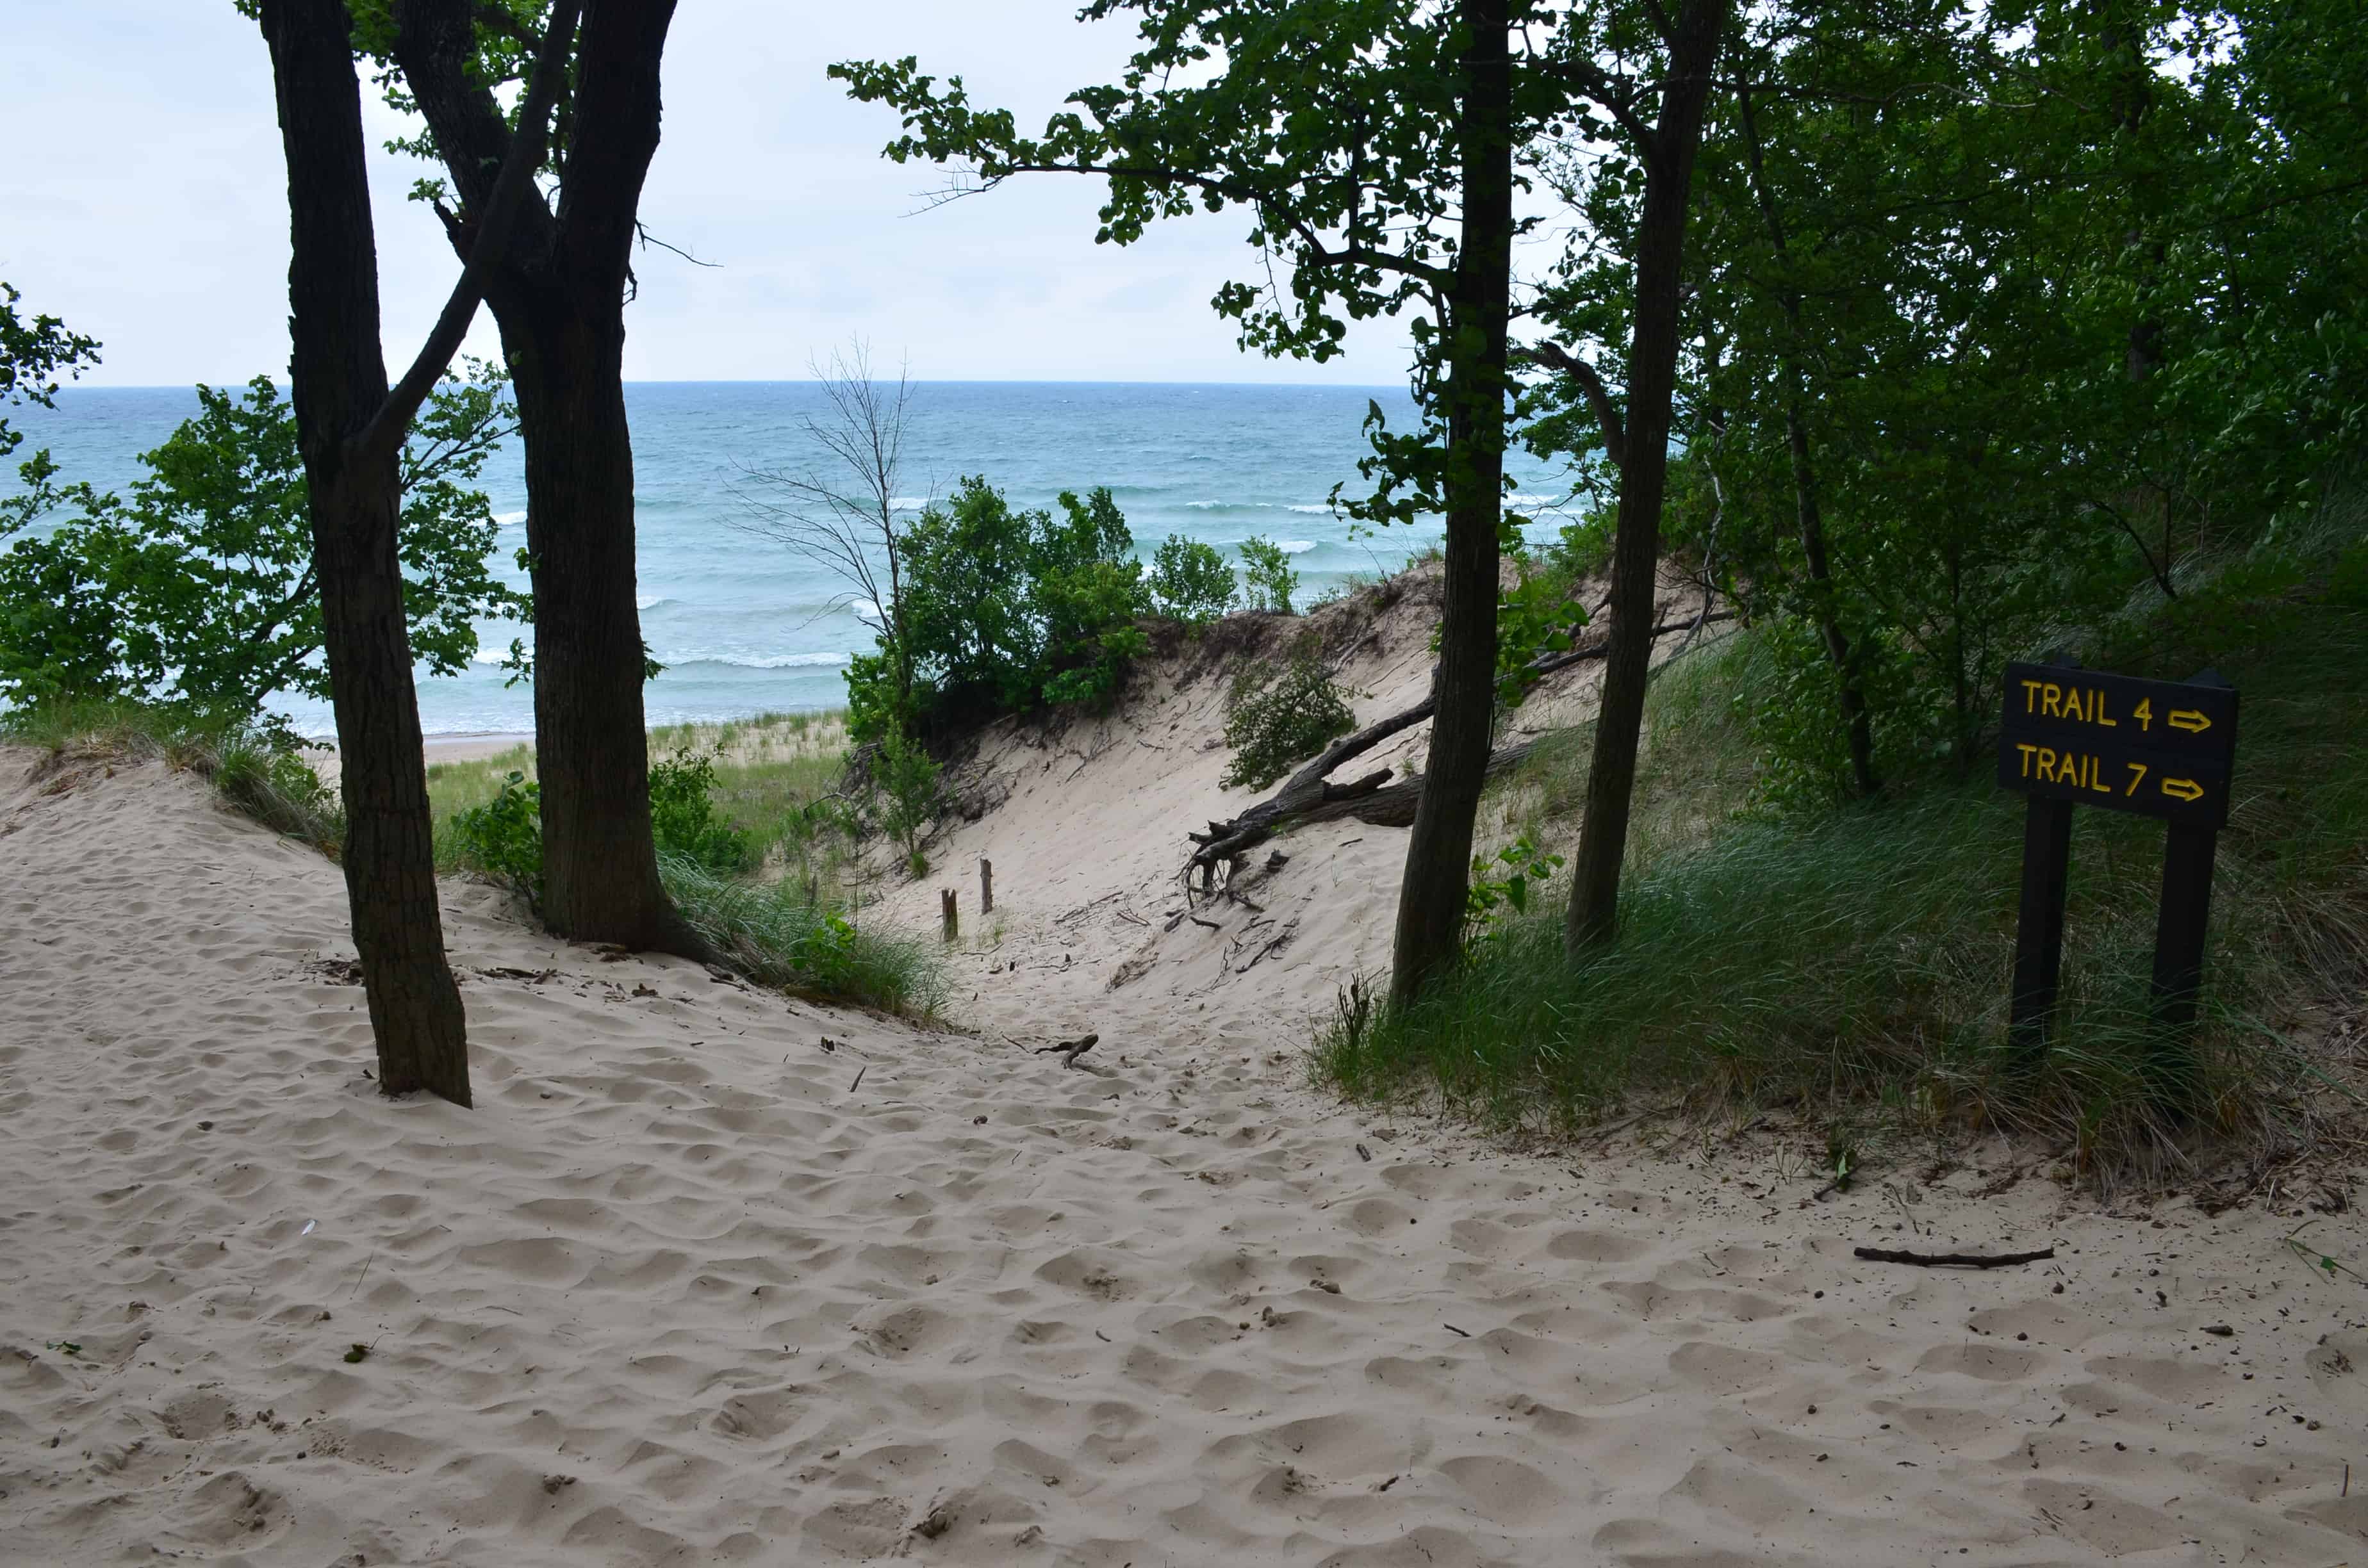 The beach at Trails #7 and #4 at Indiana Dunes State Park